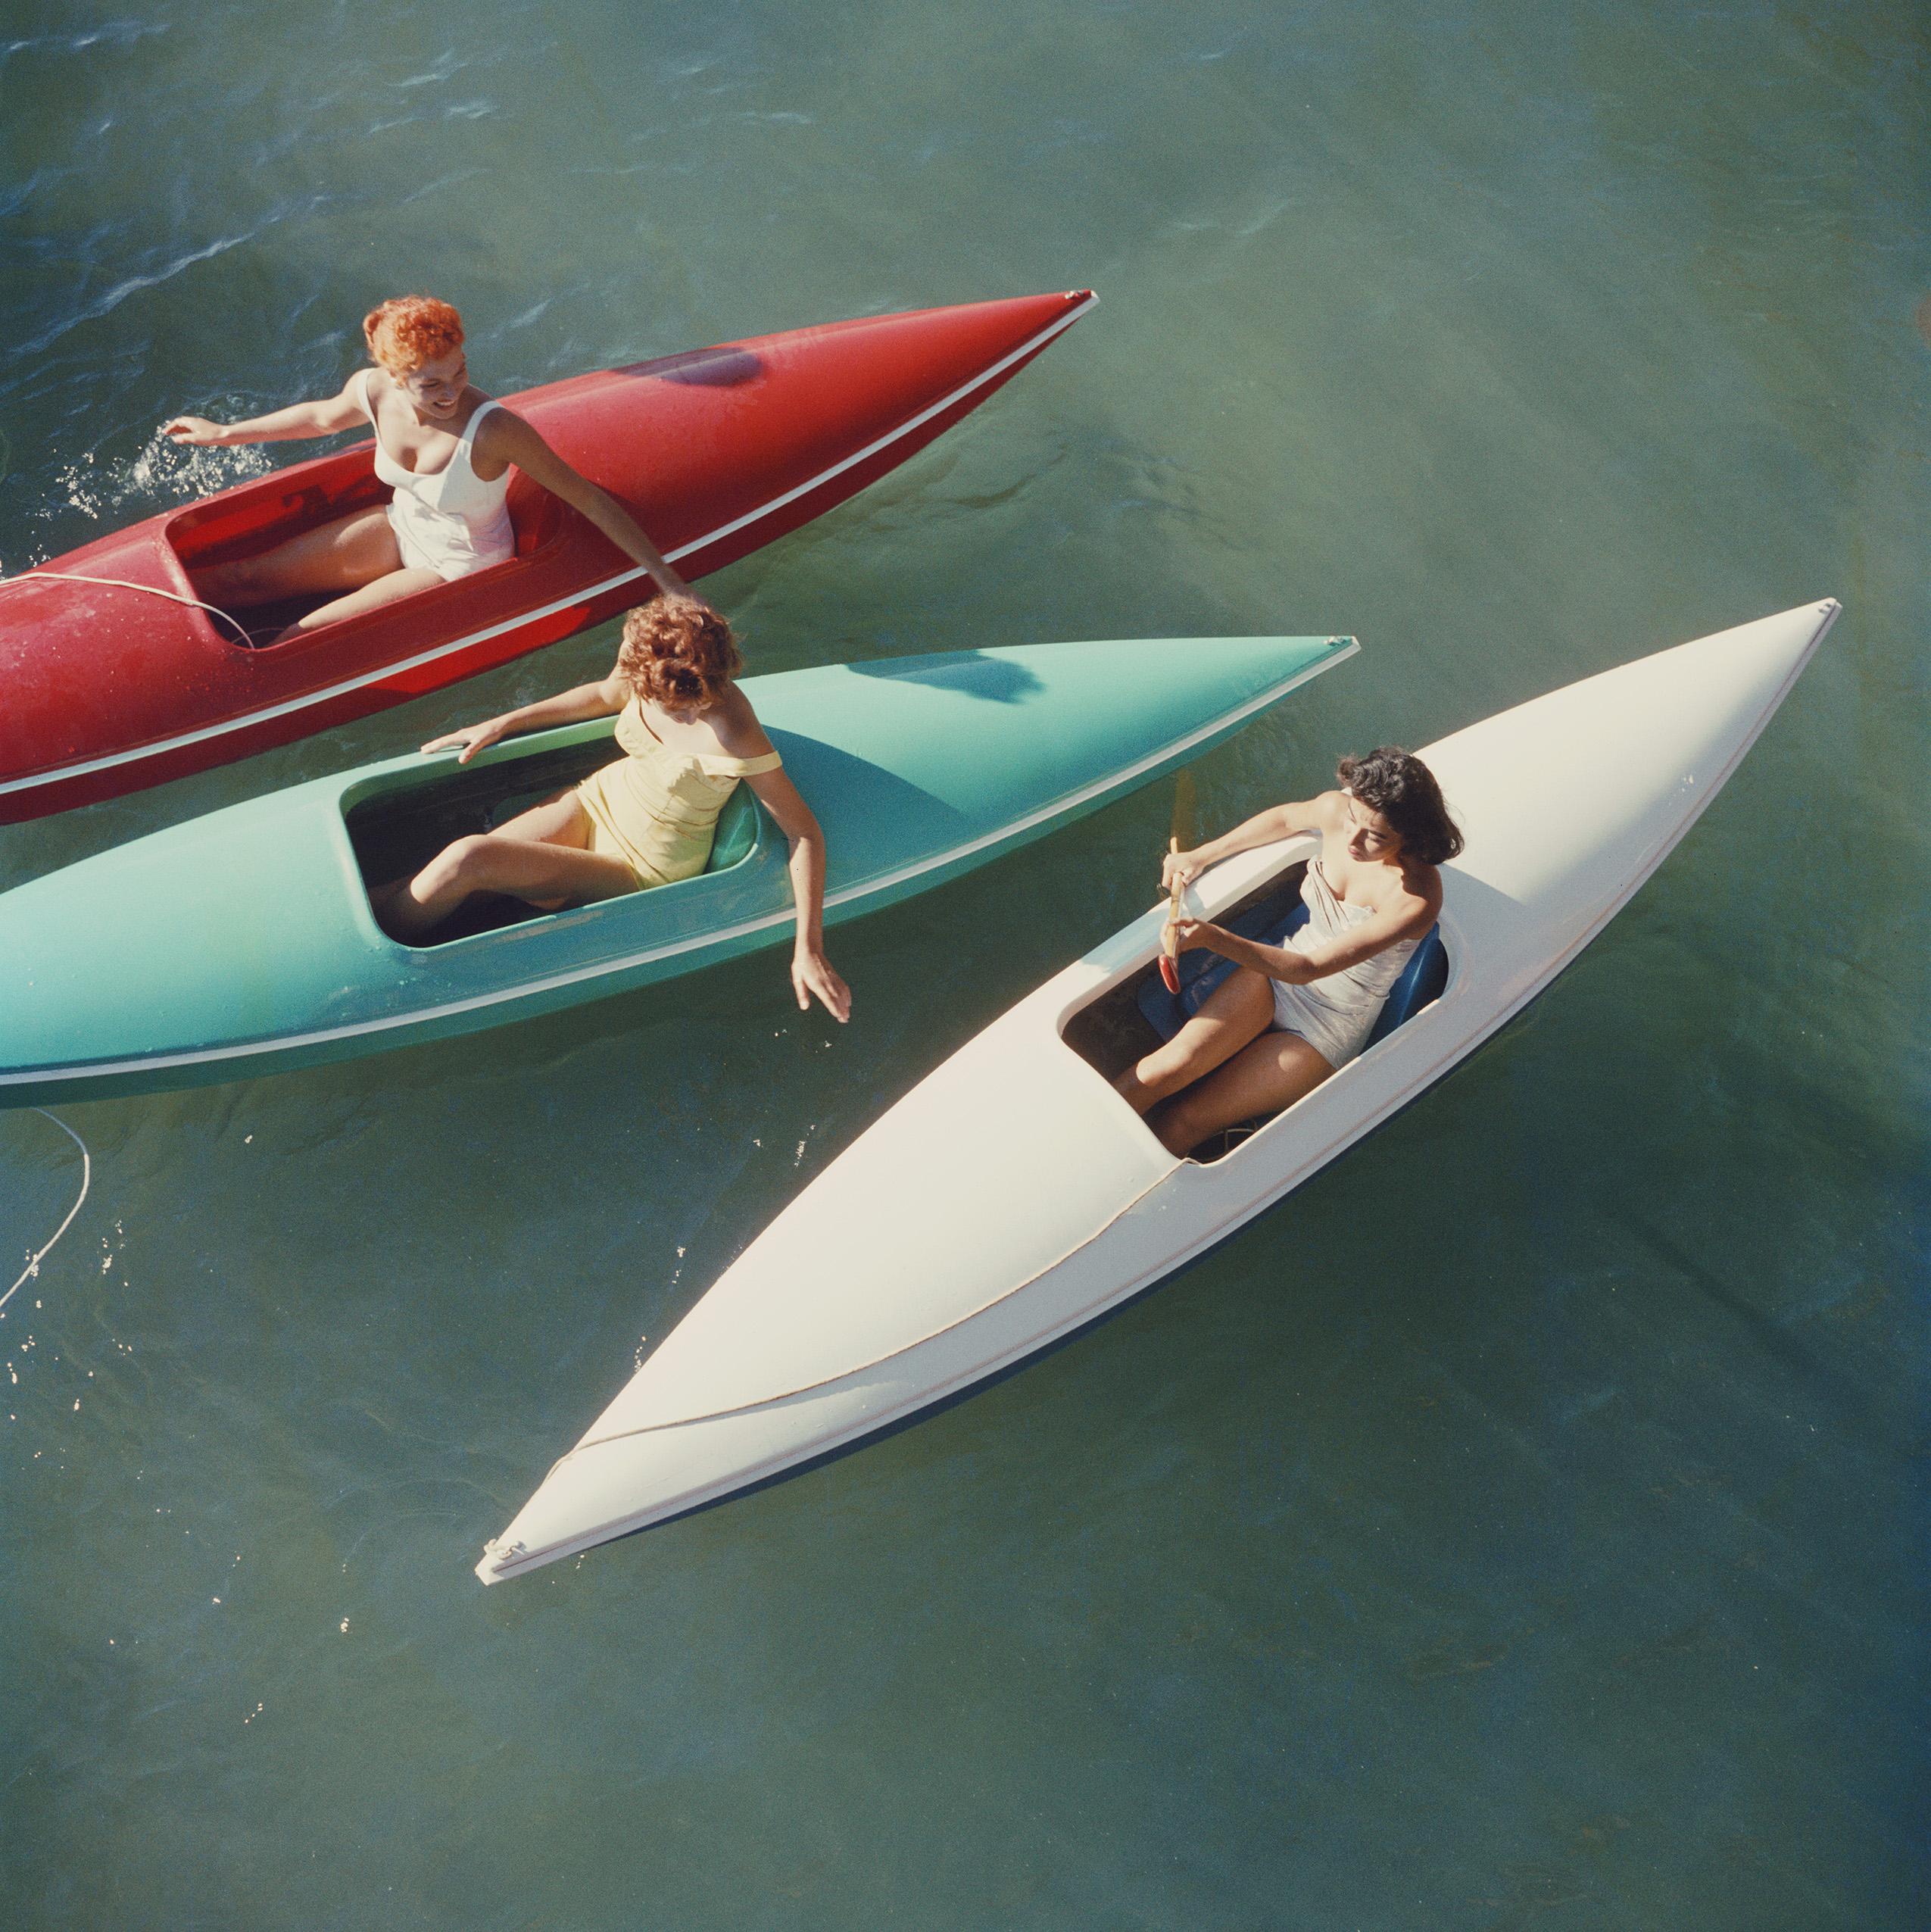 Slim Aarons Color Photograph - Lake Tahoe Trip, Estate Edition Photograph, Red, Green, White Canoes Zephyr Cove